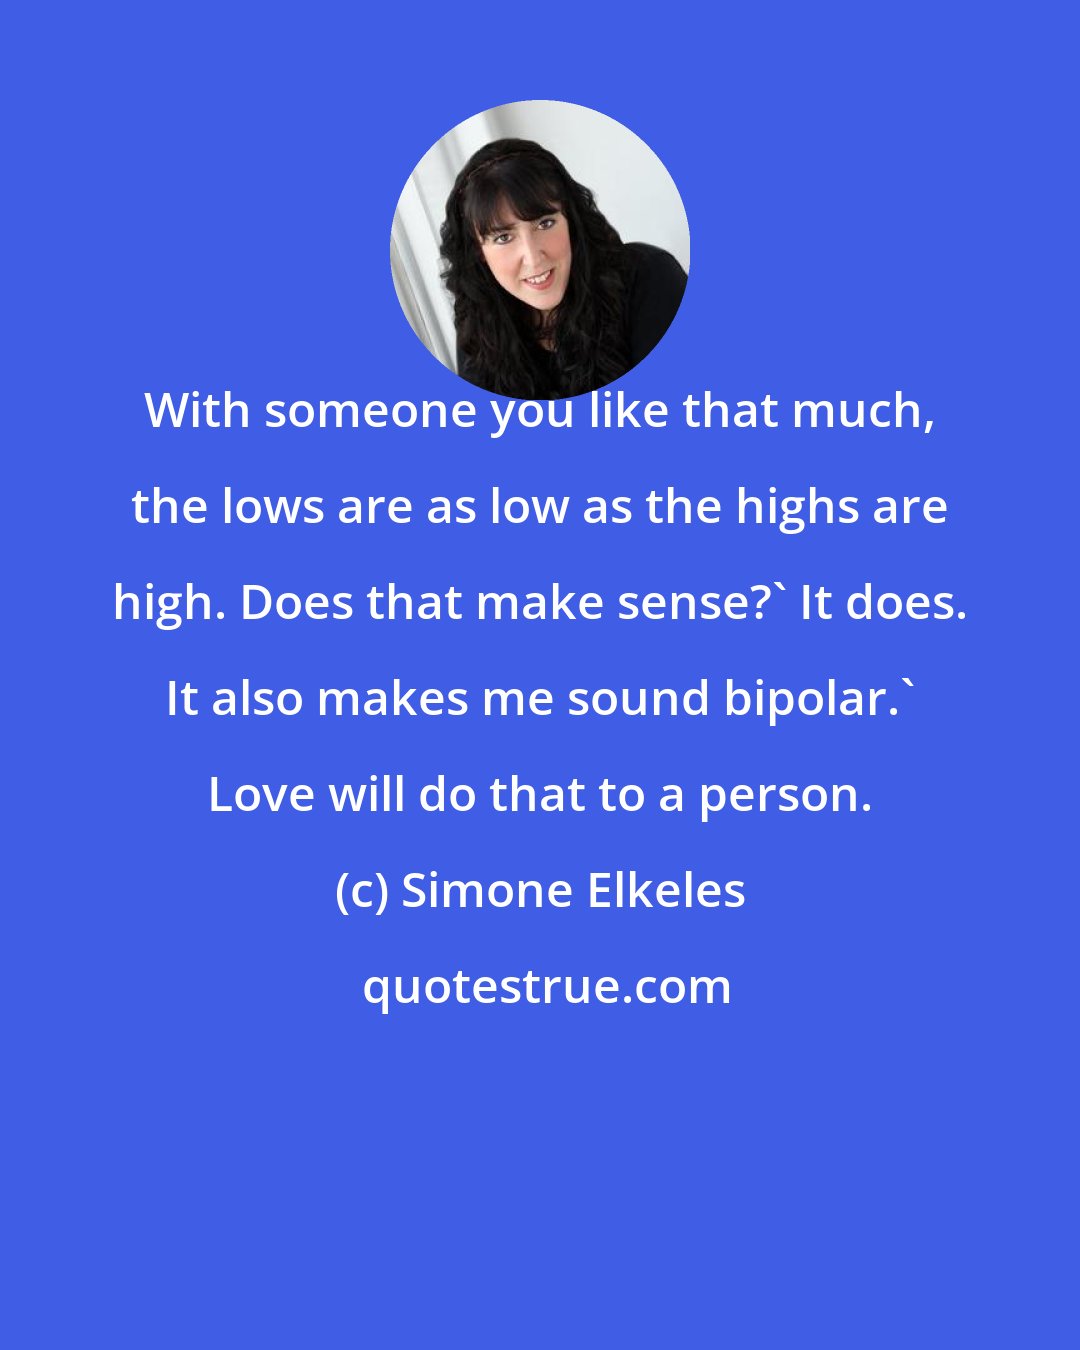 Simone Elkeles: With someone you like that much, the lows are as low as the highs are high. Does that make sense?' It does. It also makes me sound bipolar.' Love will do that to a person.